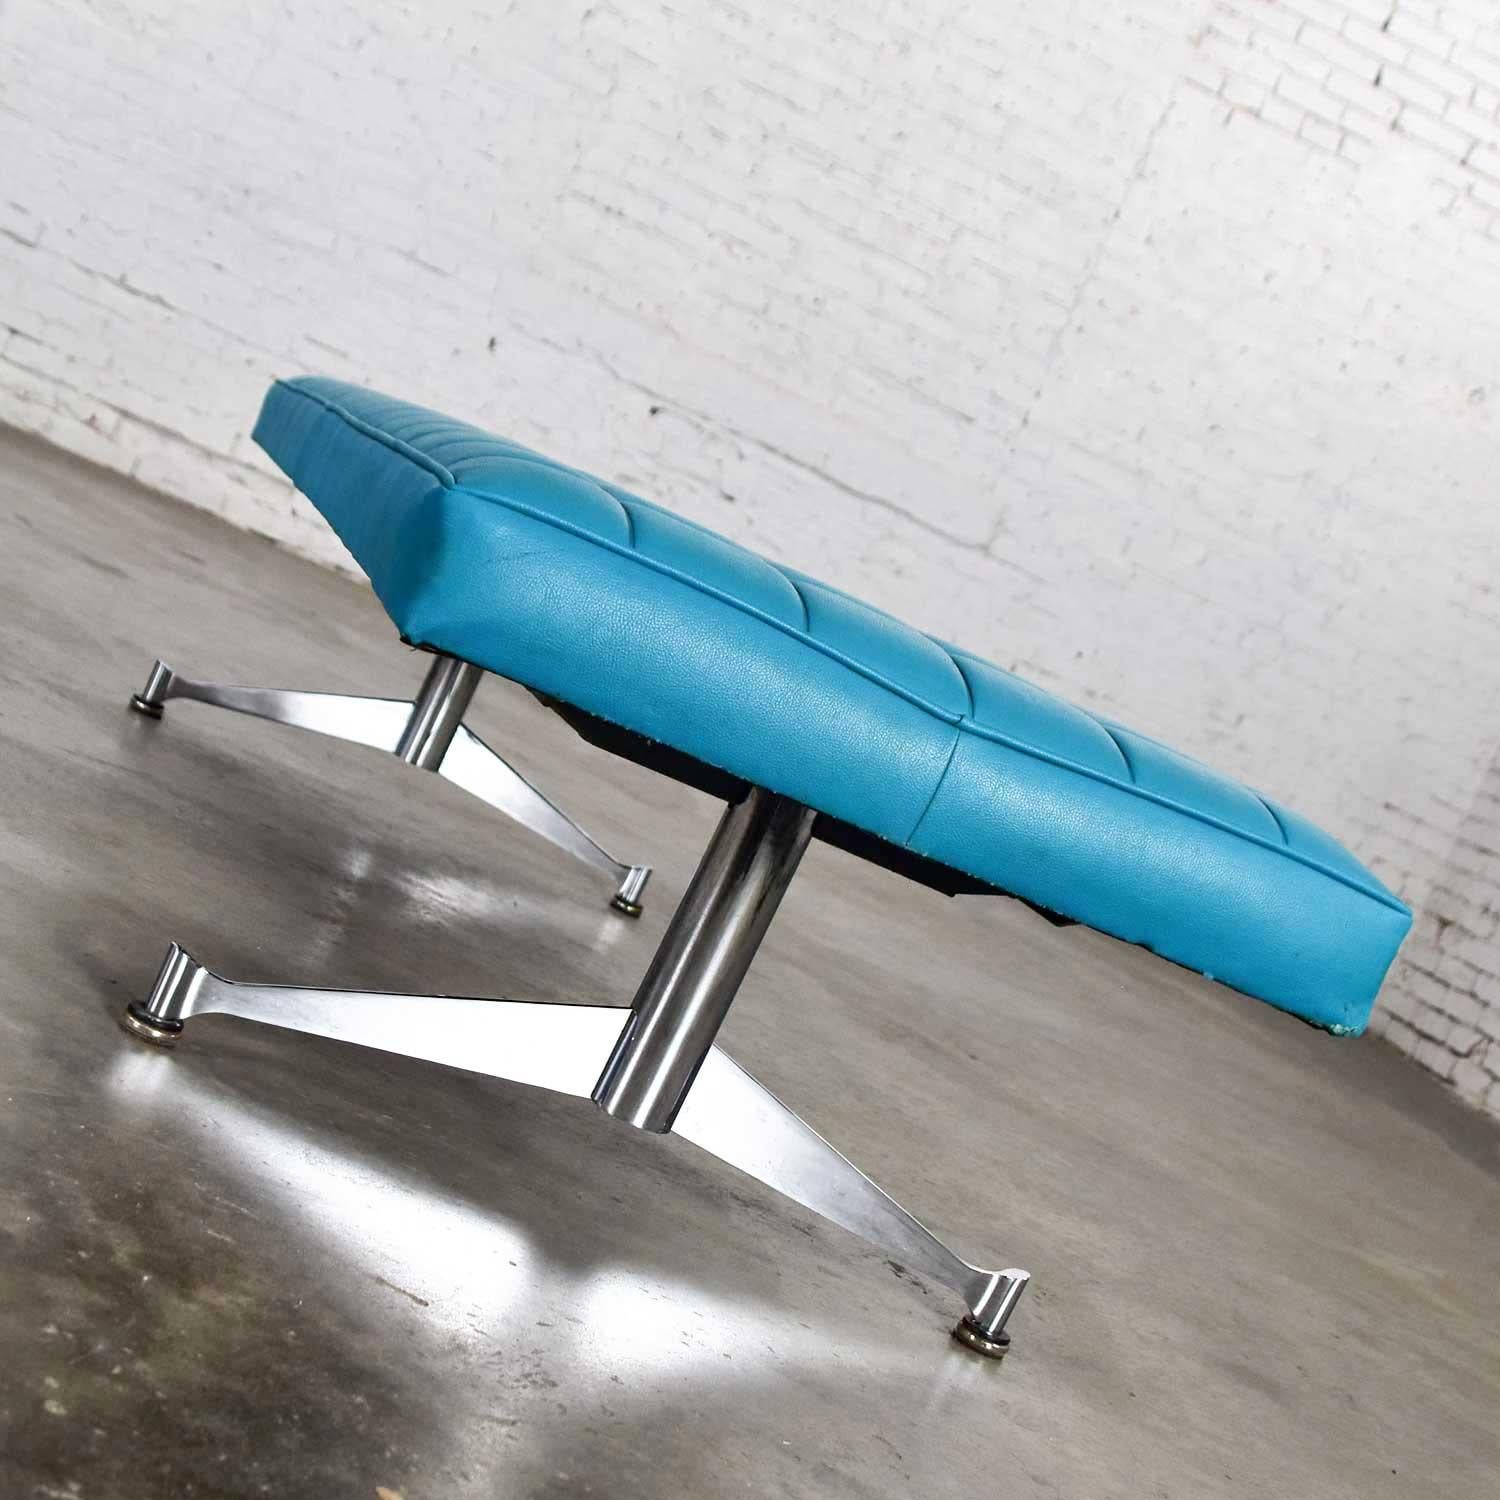 Madison Furn. Vinyl Faux Leather Turquoise Chrome Bench Daybed Style A. Umanoff For Sale 1